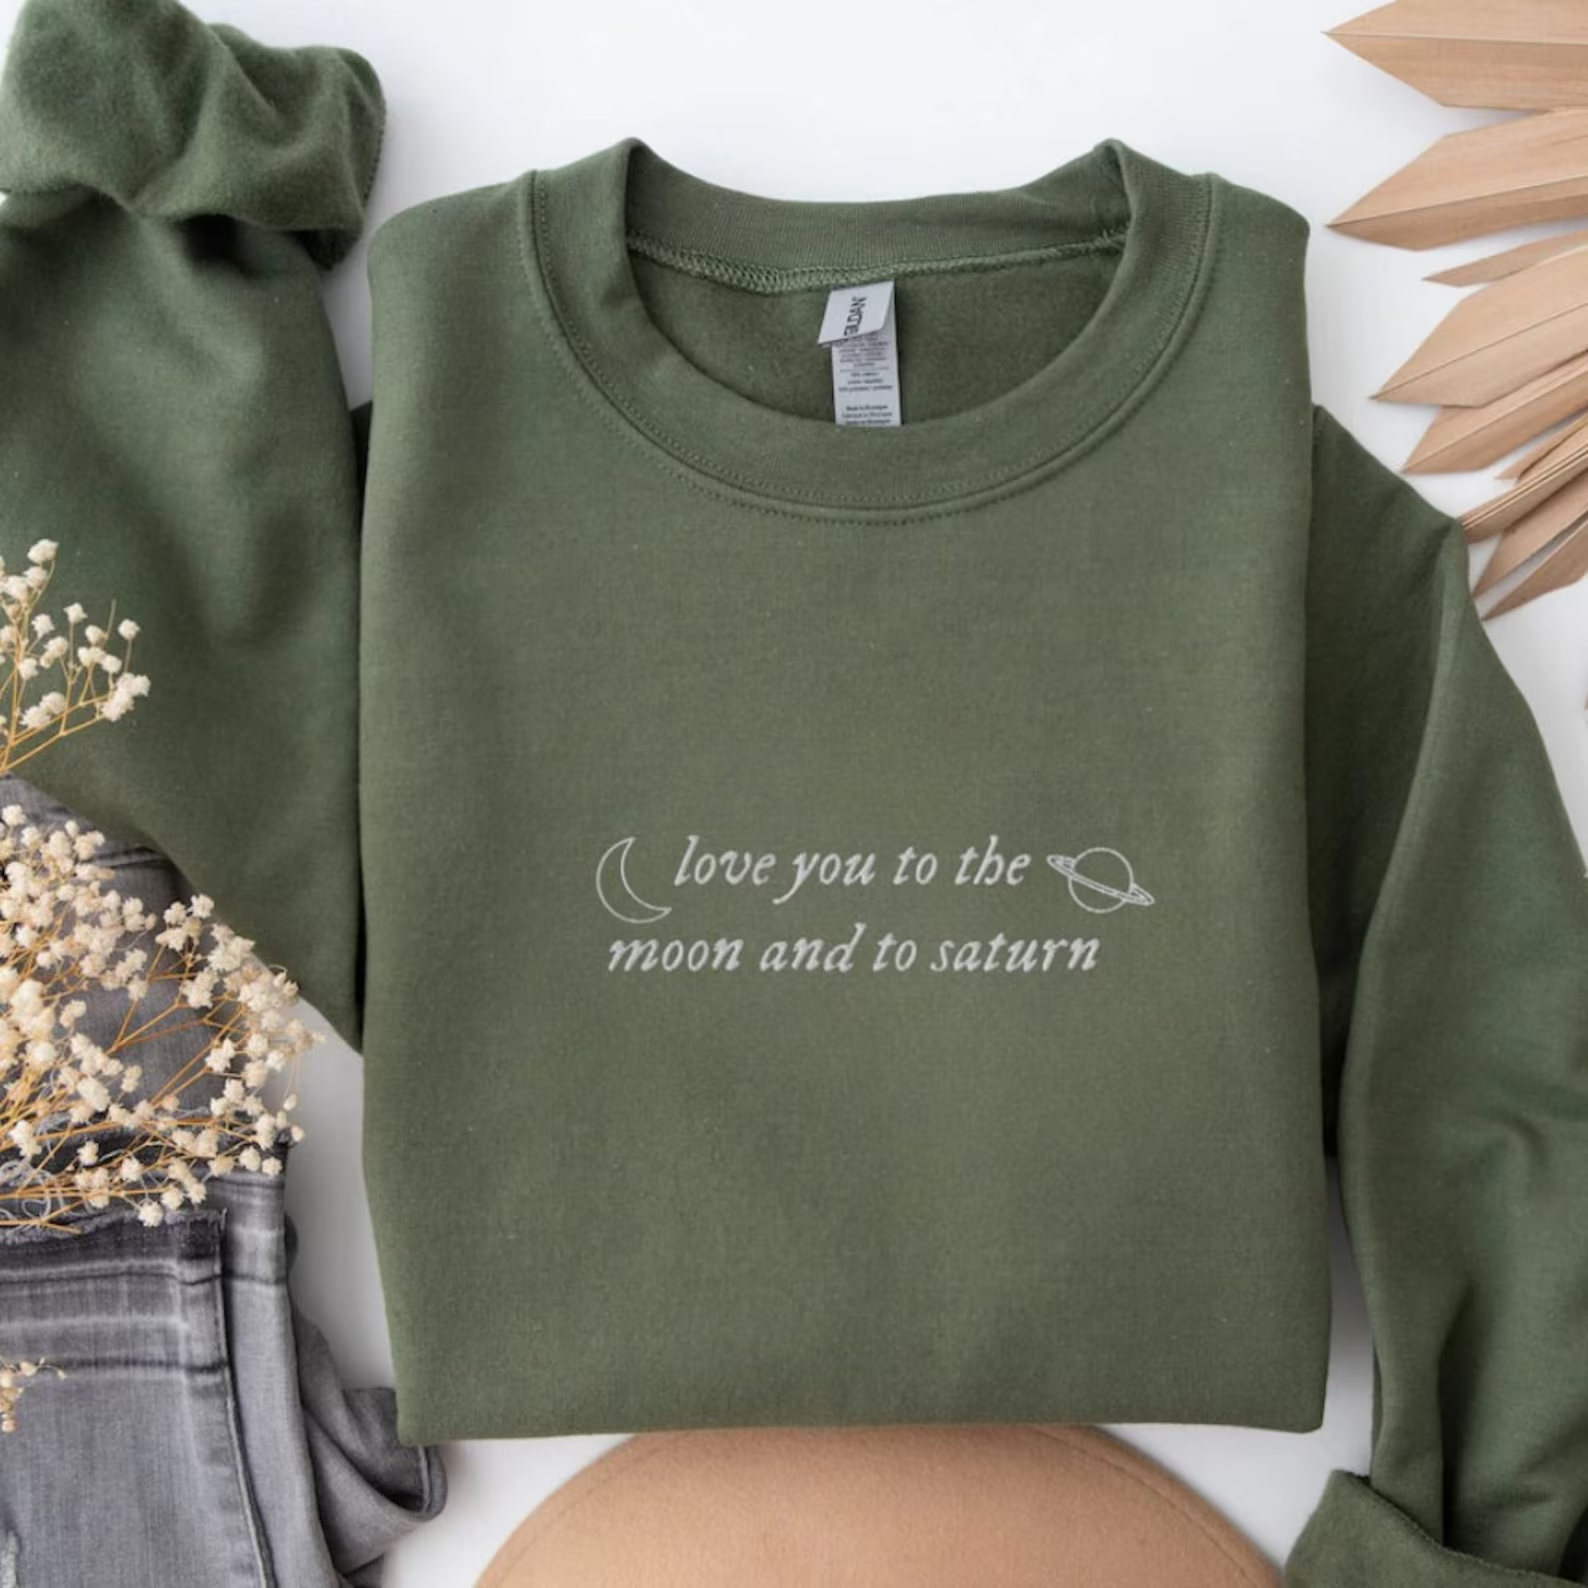 Love You to the Moon & Saturn Embroidered Sweatshirt